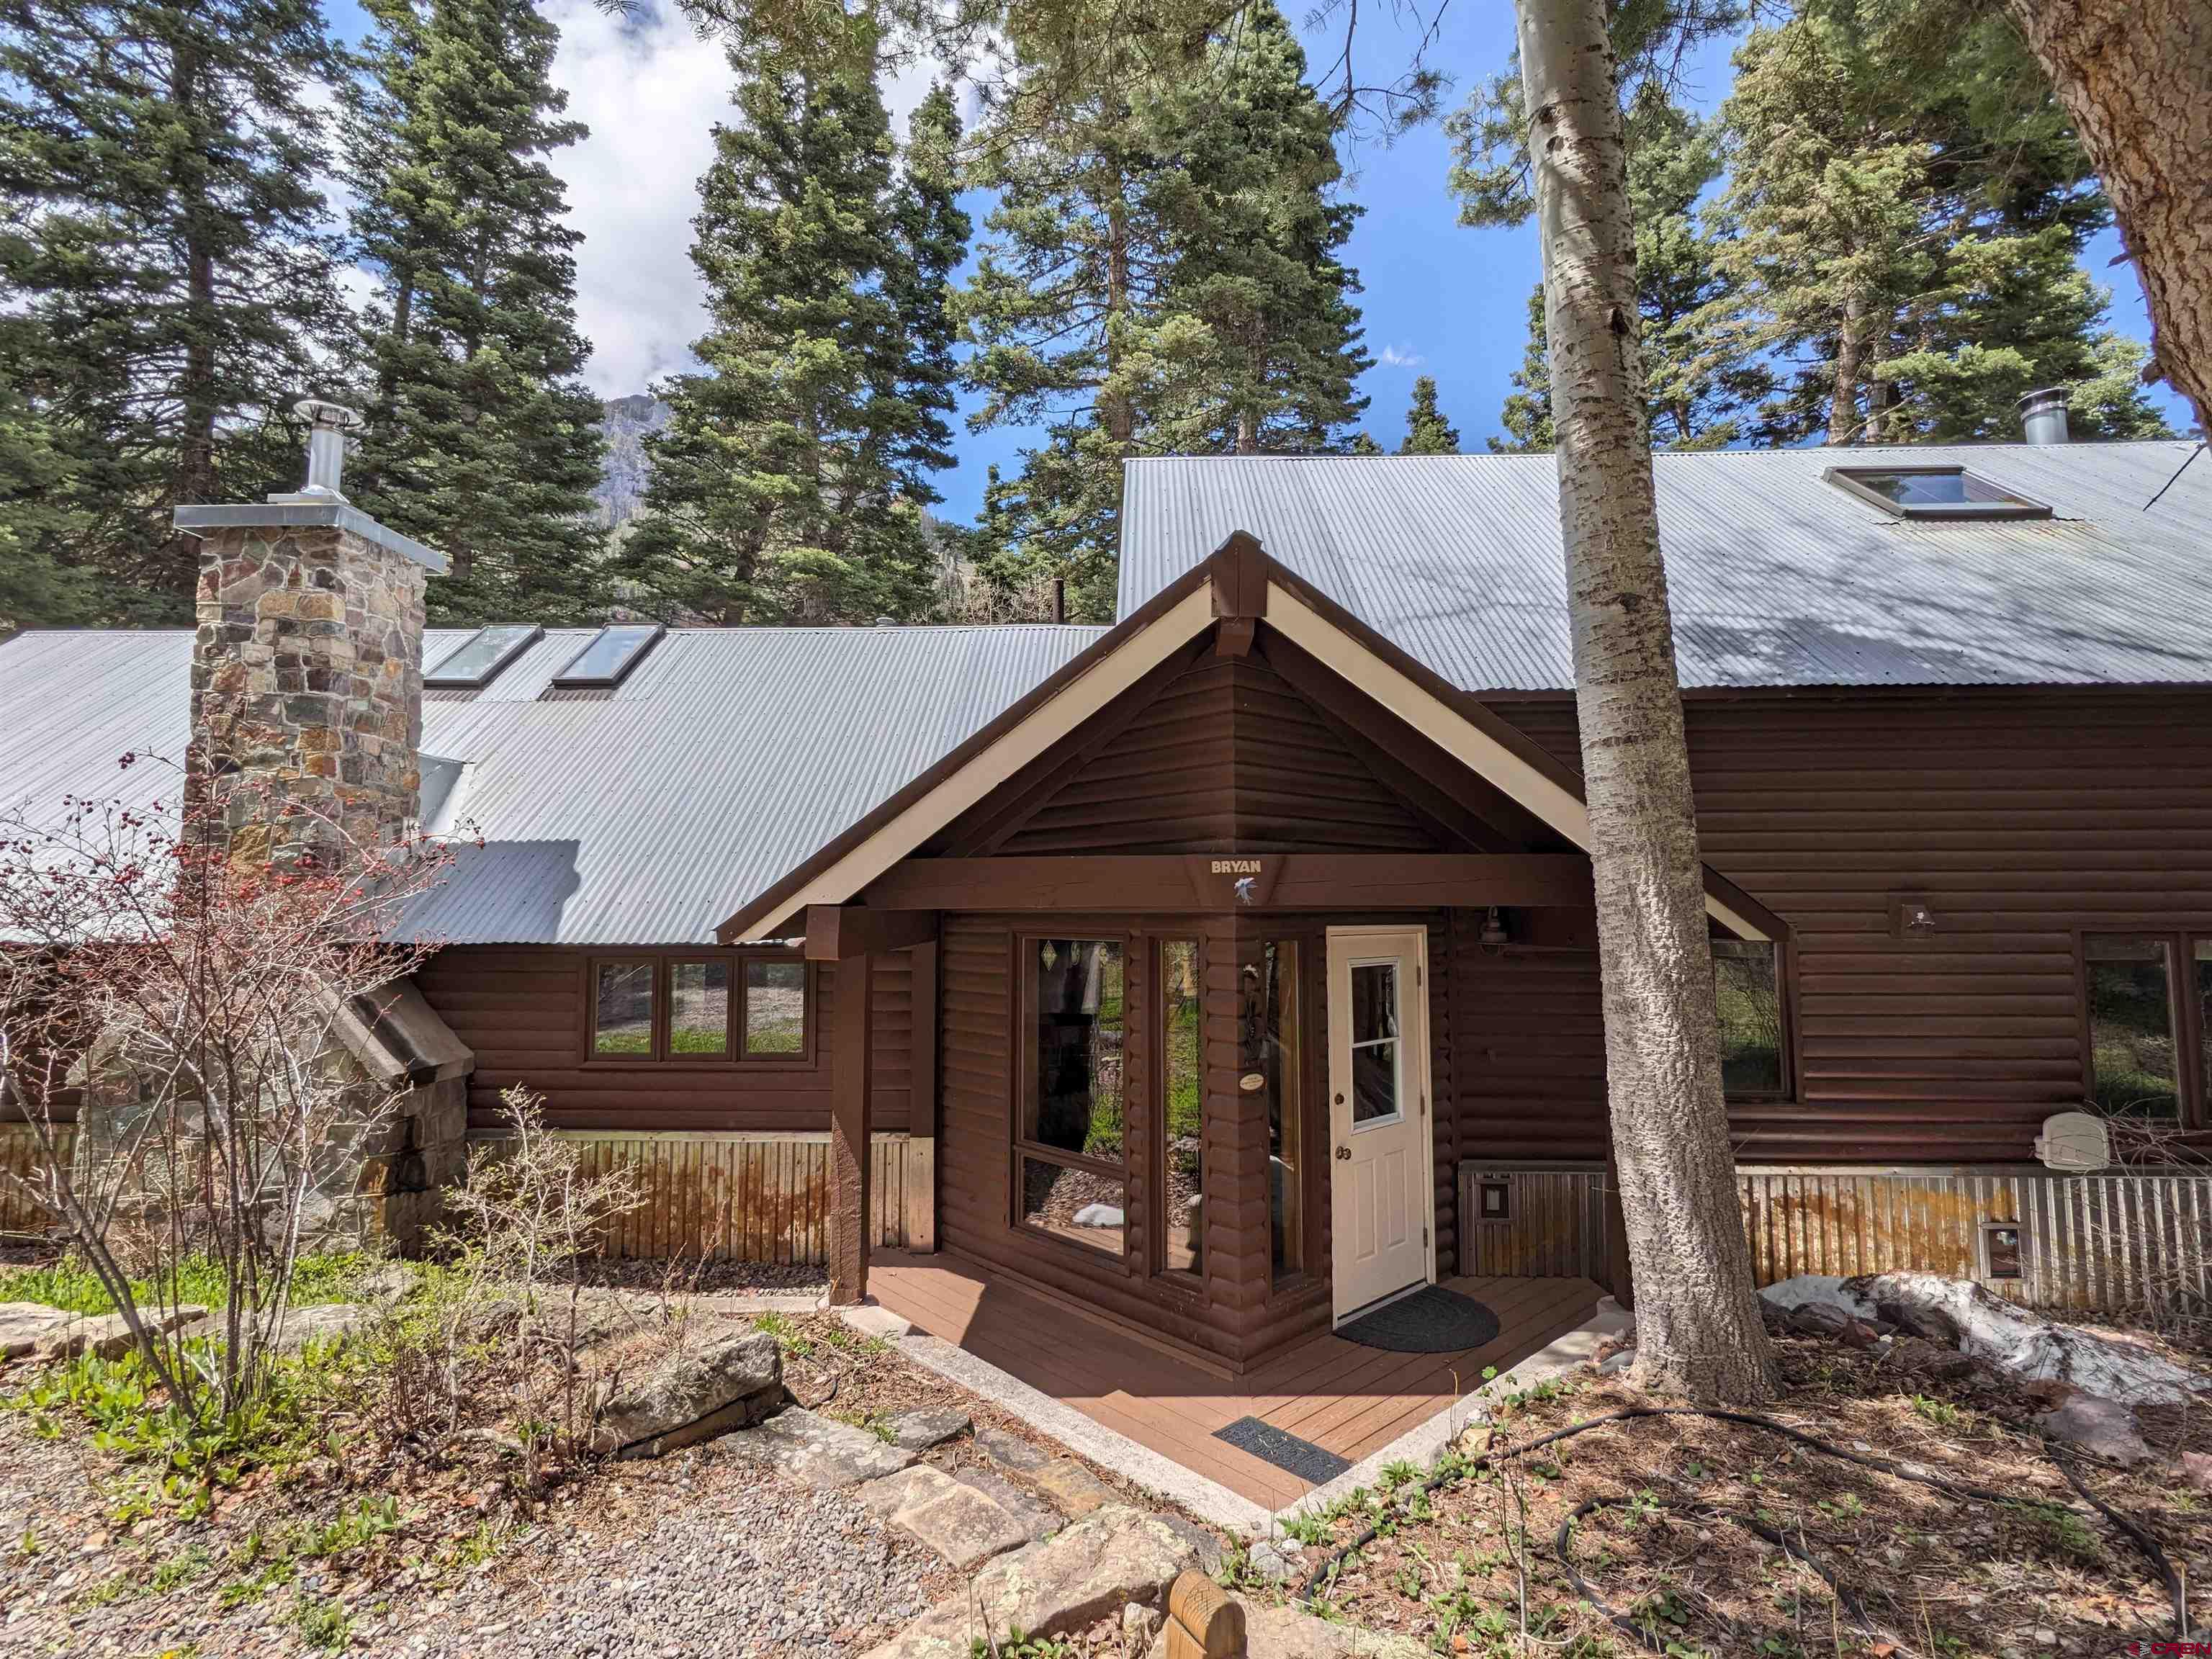 This cozy cabin is locating in the popular Mineral Farms neighborhood south of Ouray, Colorado. The original cabin was built in 1959 and then there was an addition added in 1989. As you enter the house you are greeted by a nice light and bright entryway leading to the kitchen. The kitchen has all new appliances and a cellar accessible via a trap door in the kitchen floor. The dining room and living room are apart of the original cabin. There is a stacked stone wood burning fireplace (replaced in 2022), screened in covered back porch, a guest bathroom and two guest bedrooms off the living area. The laundry is located off the hallway leading to the primary suite. The primary bathroom has a bathtub, shower, two vanities and a separate toilet area. The suite is very spacious with a seating area, walk in closet, wood burning fireplace, windows and private screened in covered porch. Above the master is an amazing studio loft with beautiful beams, lots of windows, skylights, a half bathroom and a lot of storage room. The two car heated garage was built in 1997. It's oversized and has room for their current woodworking area in the back as well as a utility sink. Above the garage is an ADU with a kitchen bar area, bathroom with a shower and storage room. The house sits on one acre with big mature Aspen and Pine trees. Lots of different wildlife visit this property including, deer, fox, bobcats, turkeys and lots of other birds. The property owners have access to the Mineral Farms ponds for fishing and relaxing. Guests are welcome too but must be accompanied by the property owner. Short term rentals are allowed on this property but are subject to the counties rules and restrictions. Come see what this peaceful property has to offer you!